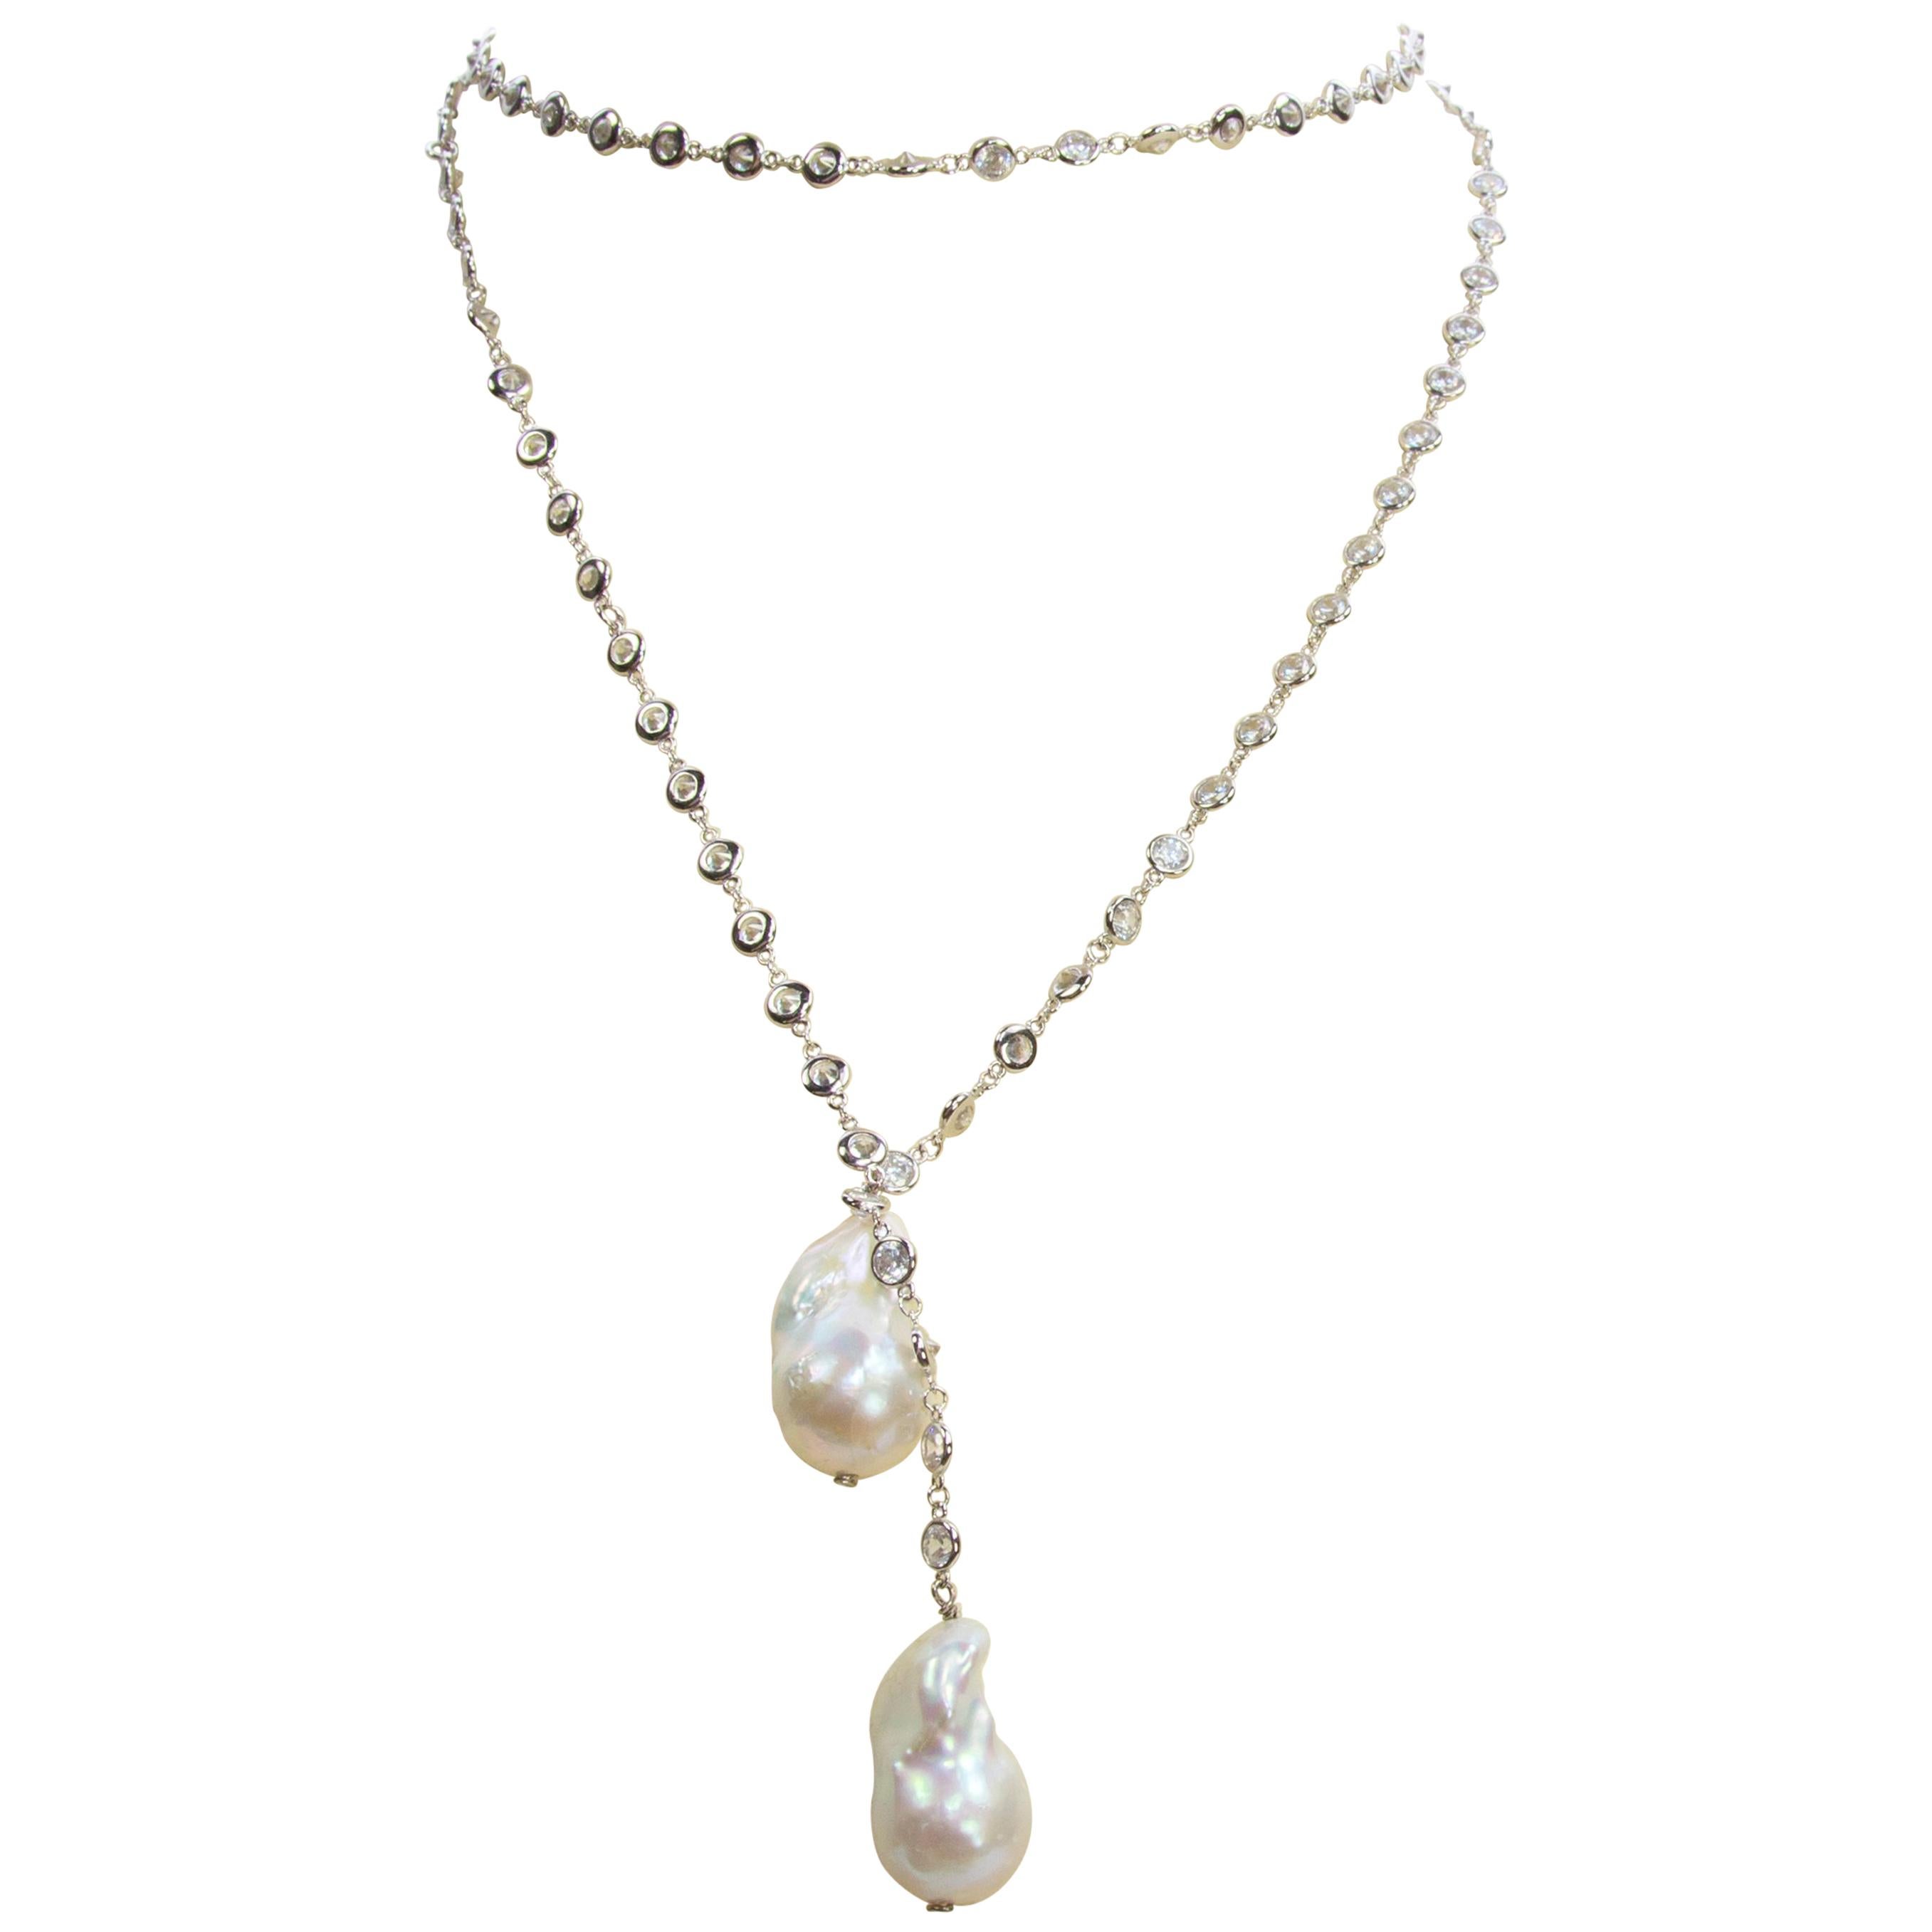 Striking Faux Diamond Baroque Pearl Lariat Sterling Silver Runway Necklace